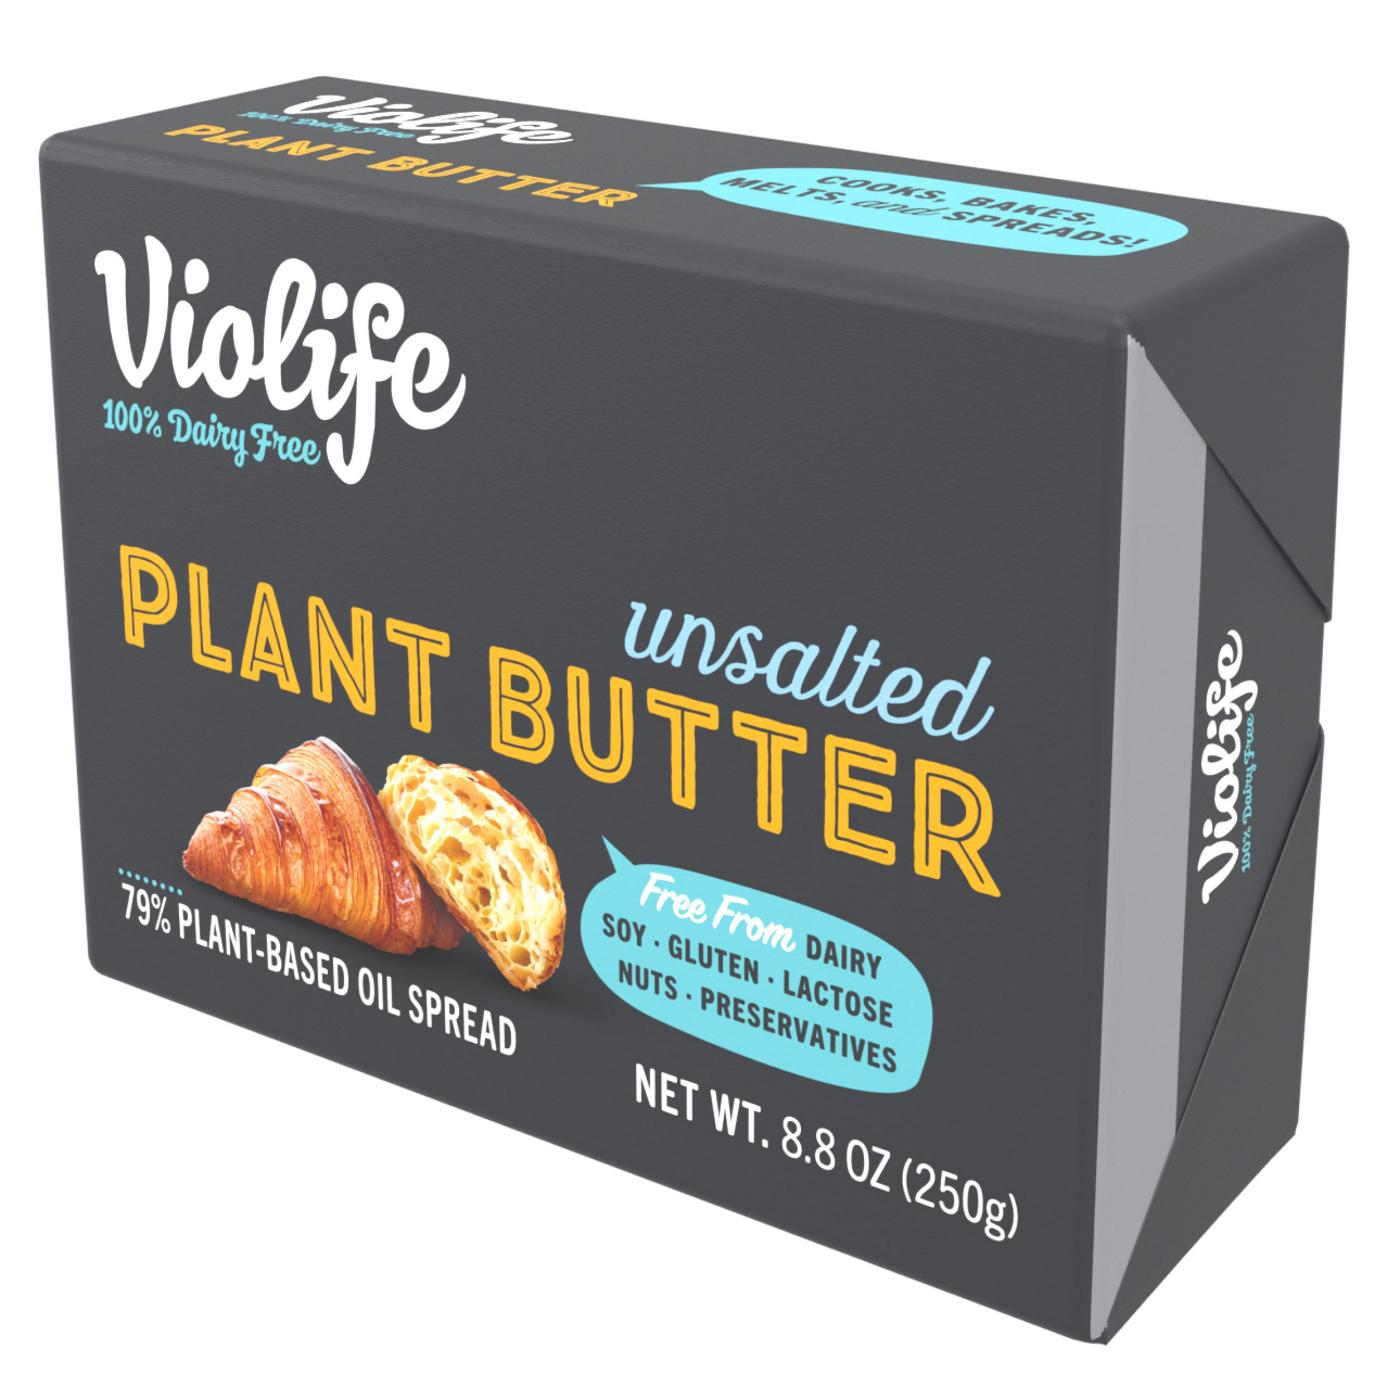 Violife Plant Butter Unsalted Dairy-Free Vegan; image 2 of 10